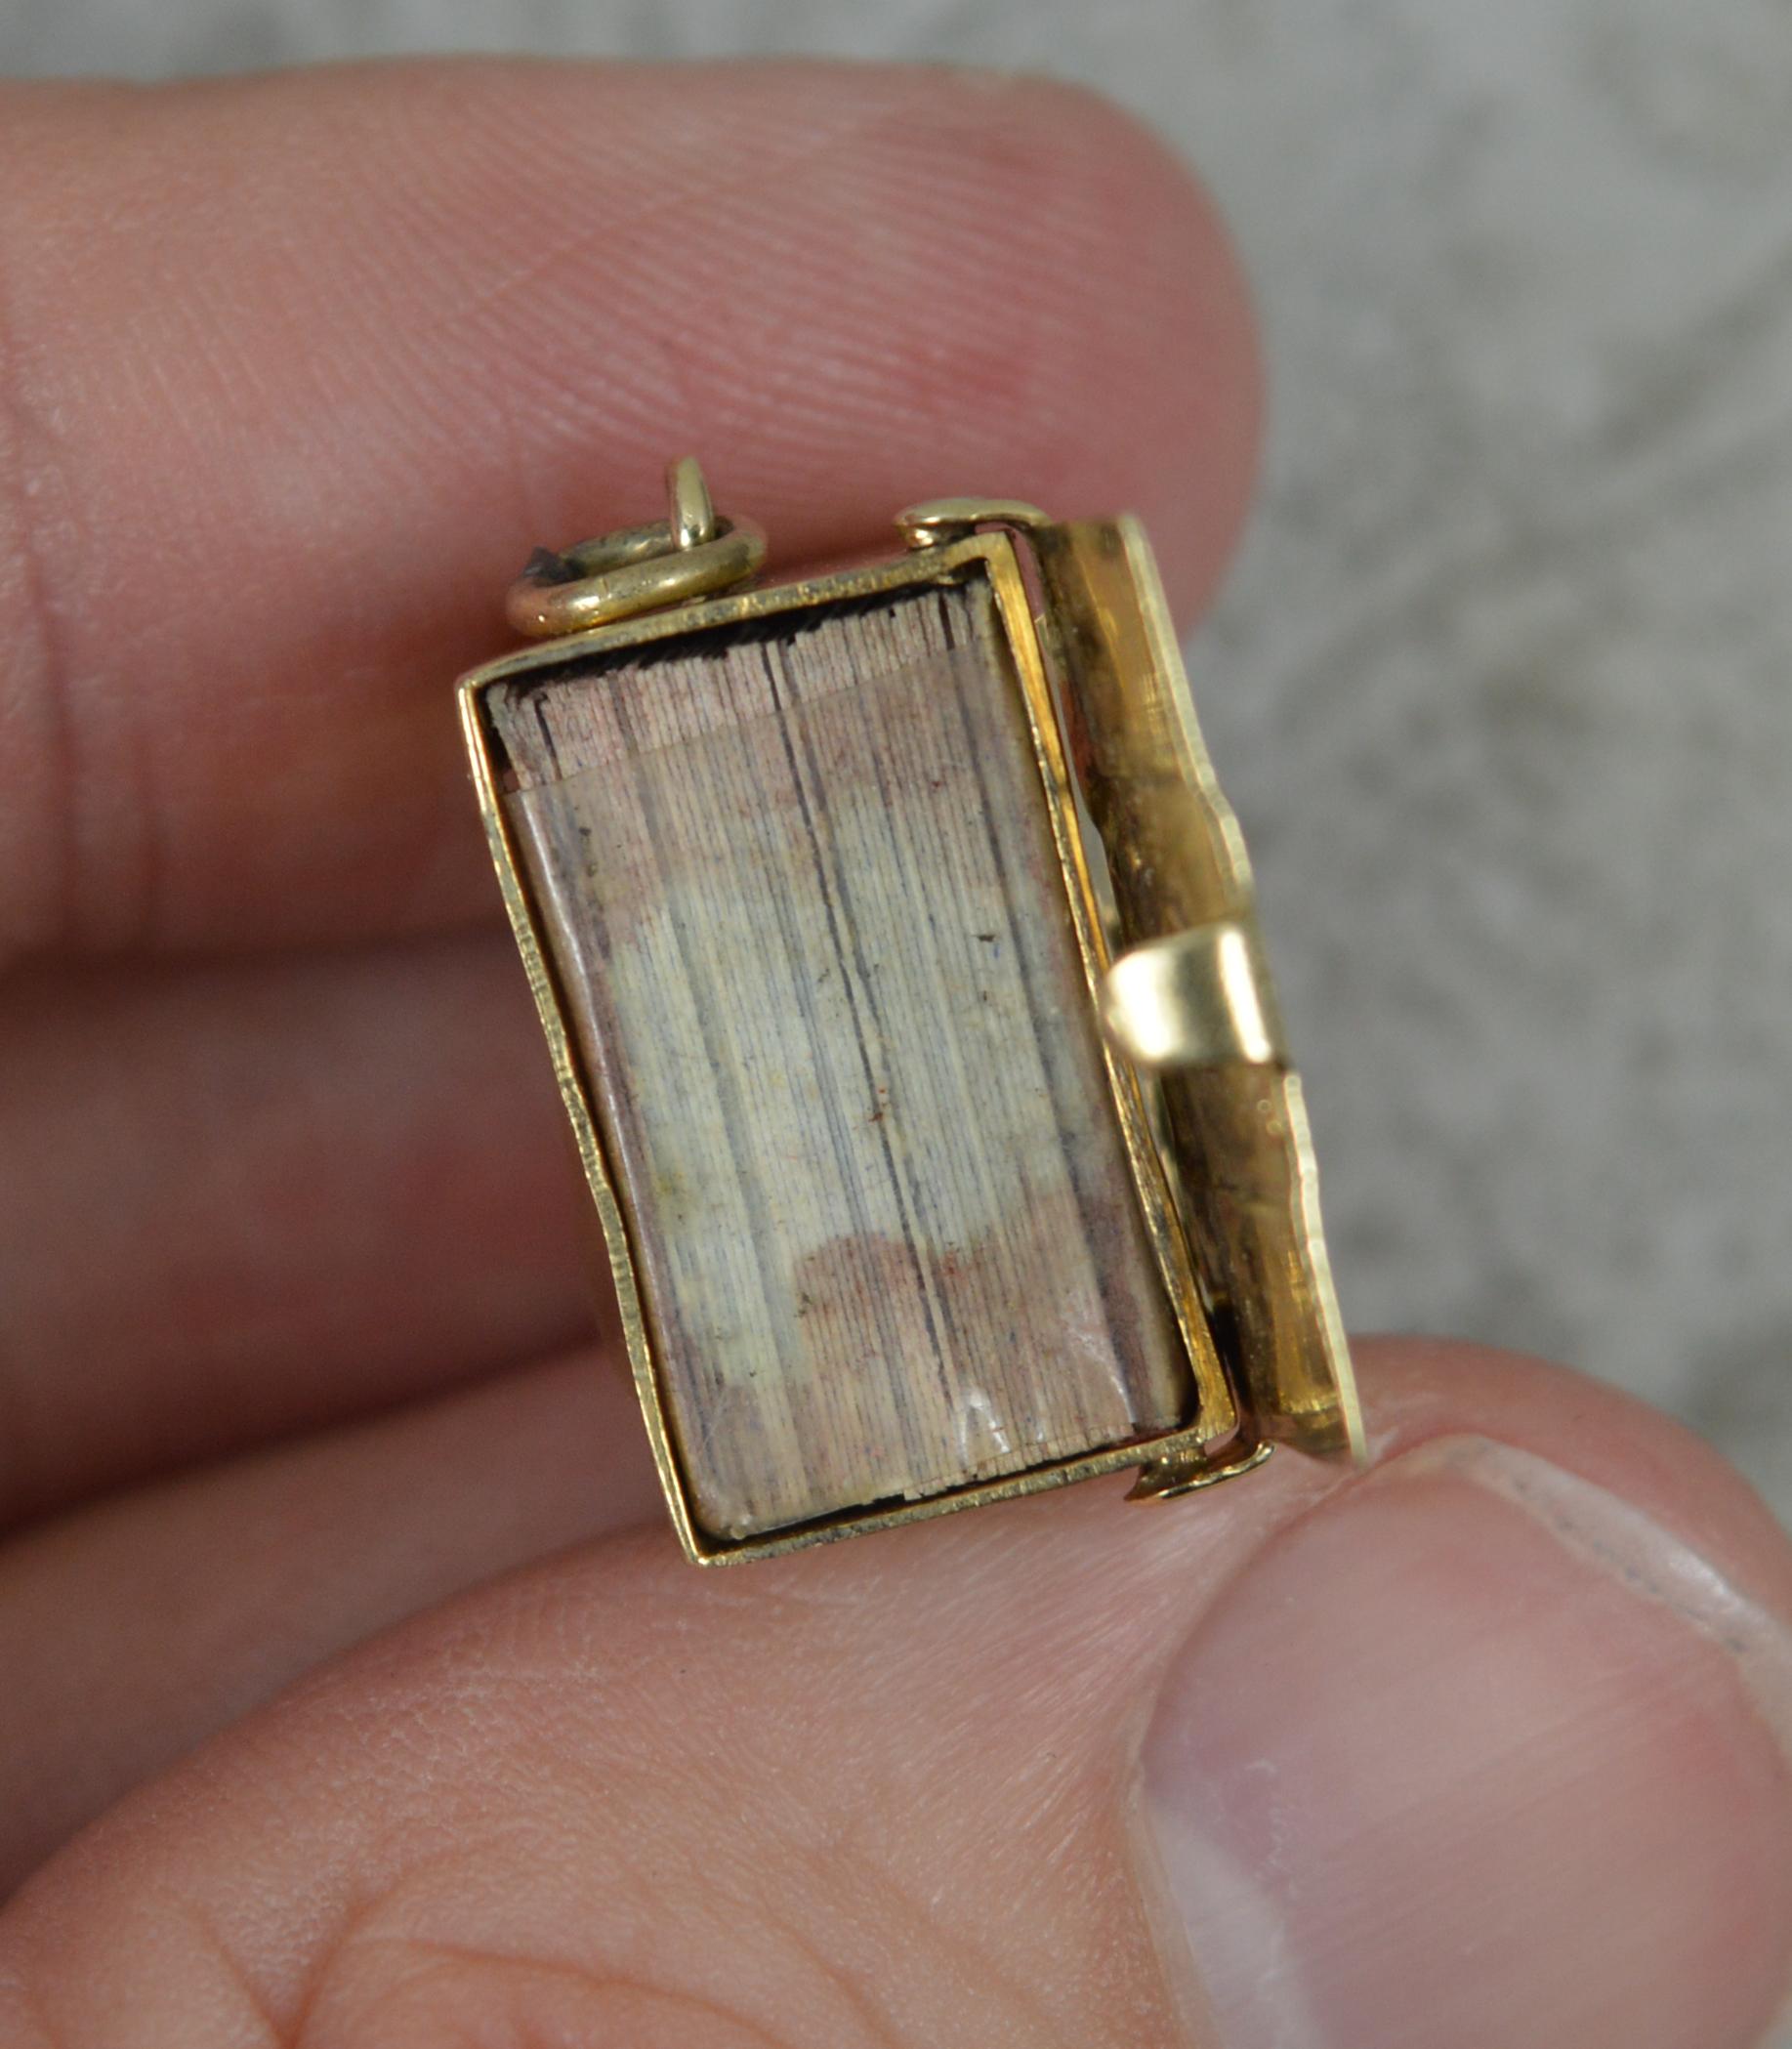 Super Rare Miniature Playing Cards and 9ct Gold Box Pendant Charm 2